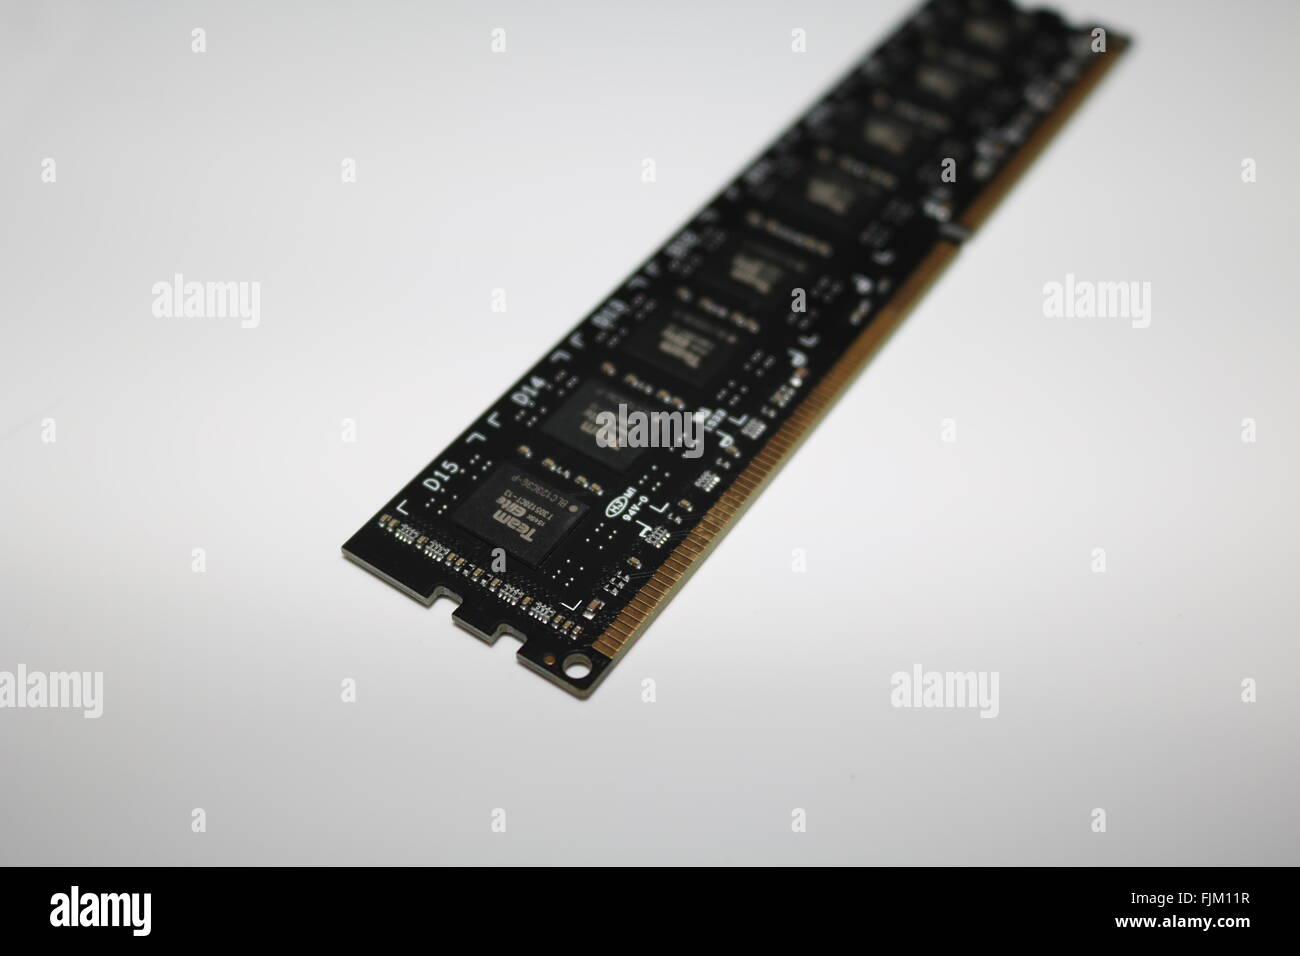 DDR3 ram memory technology it computers Stock Photo